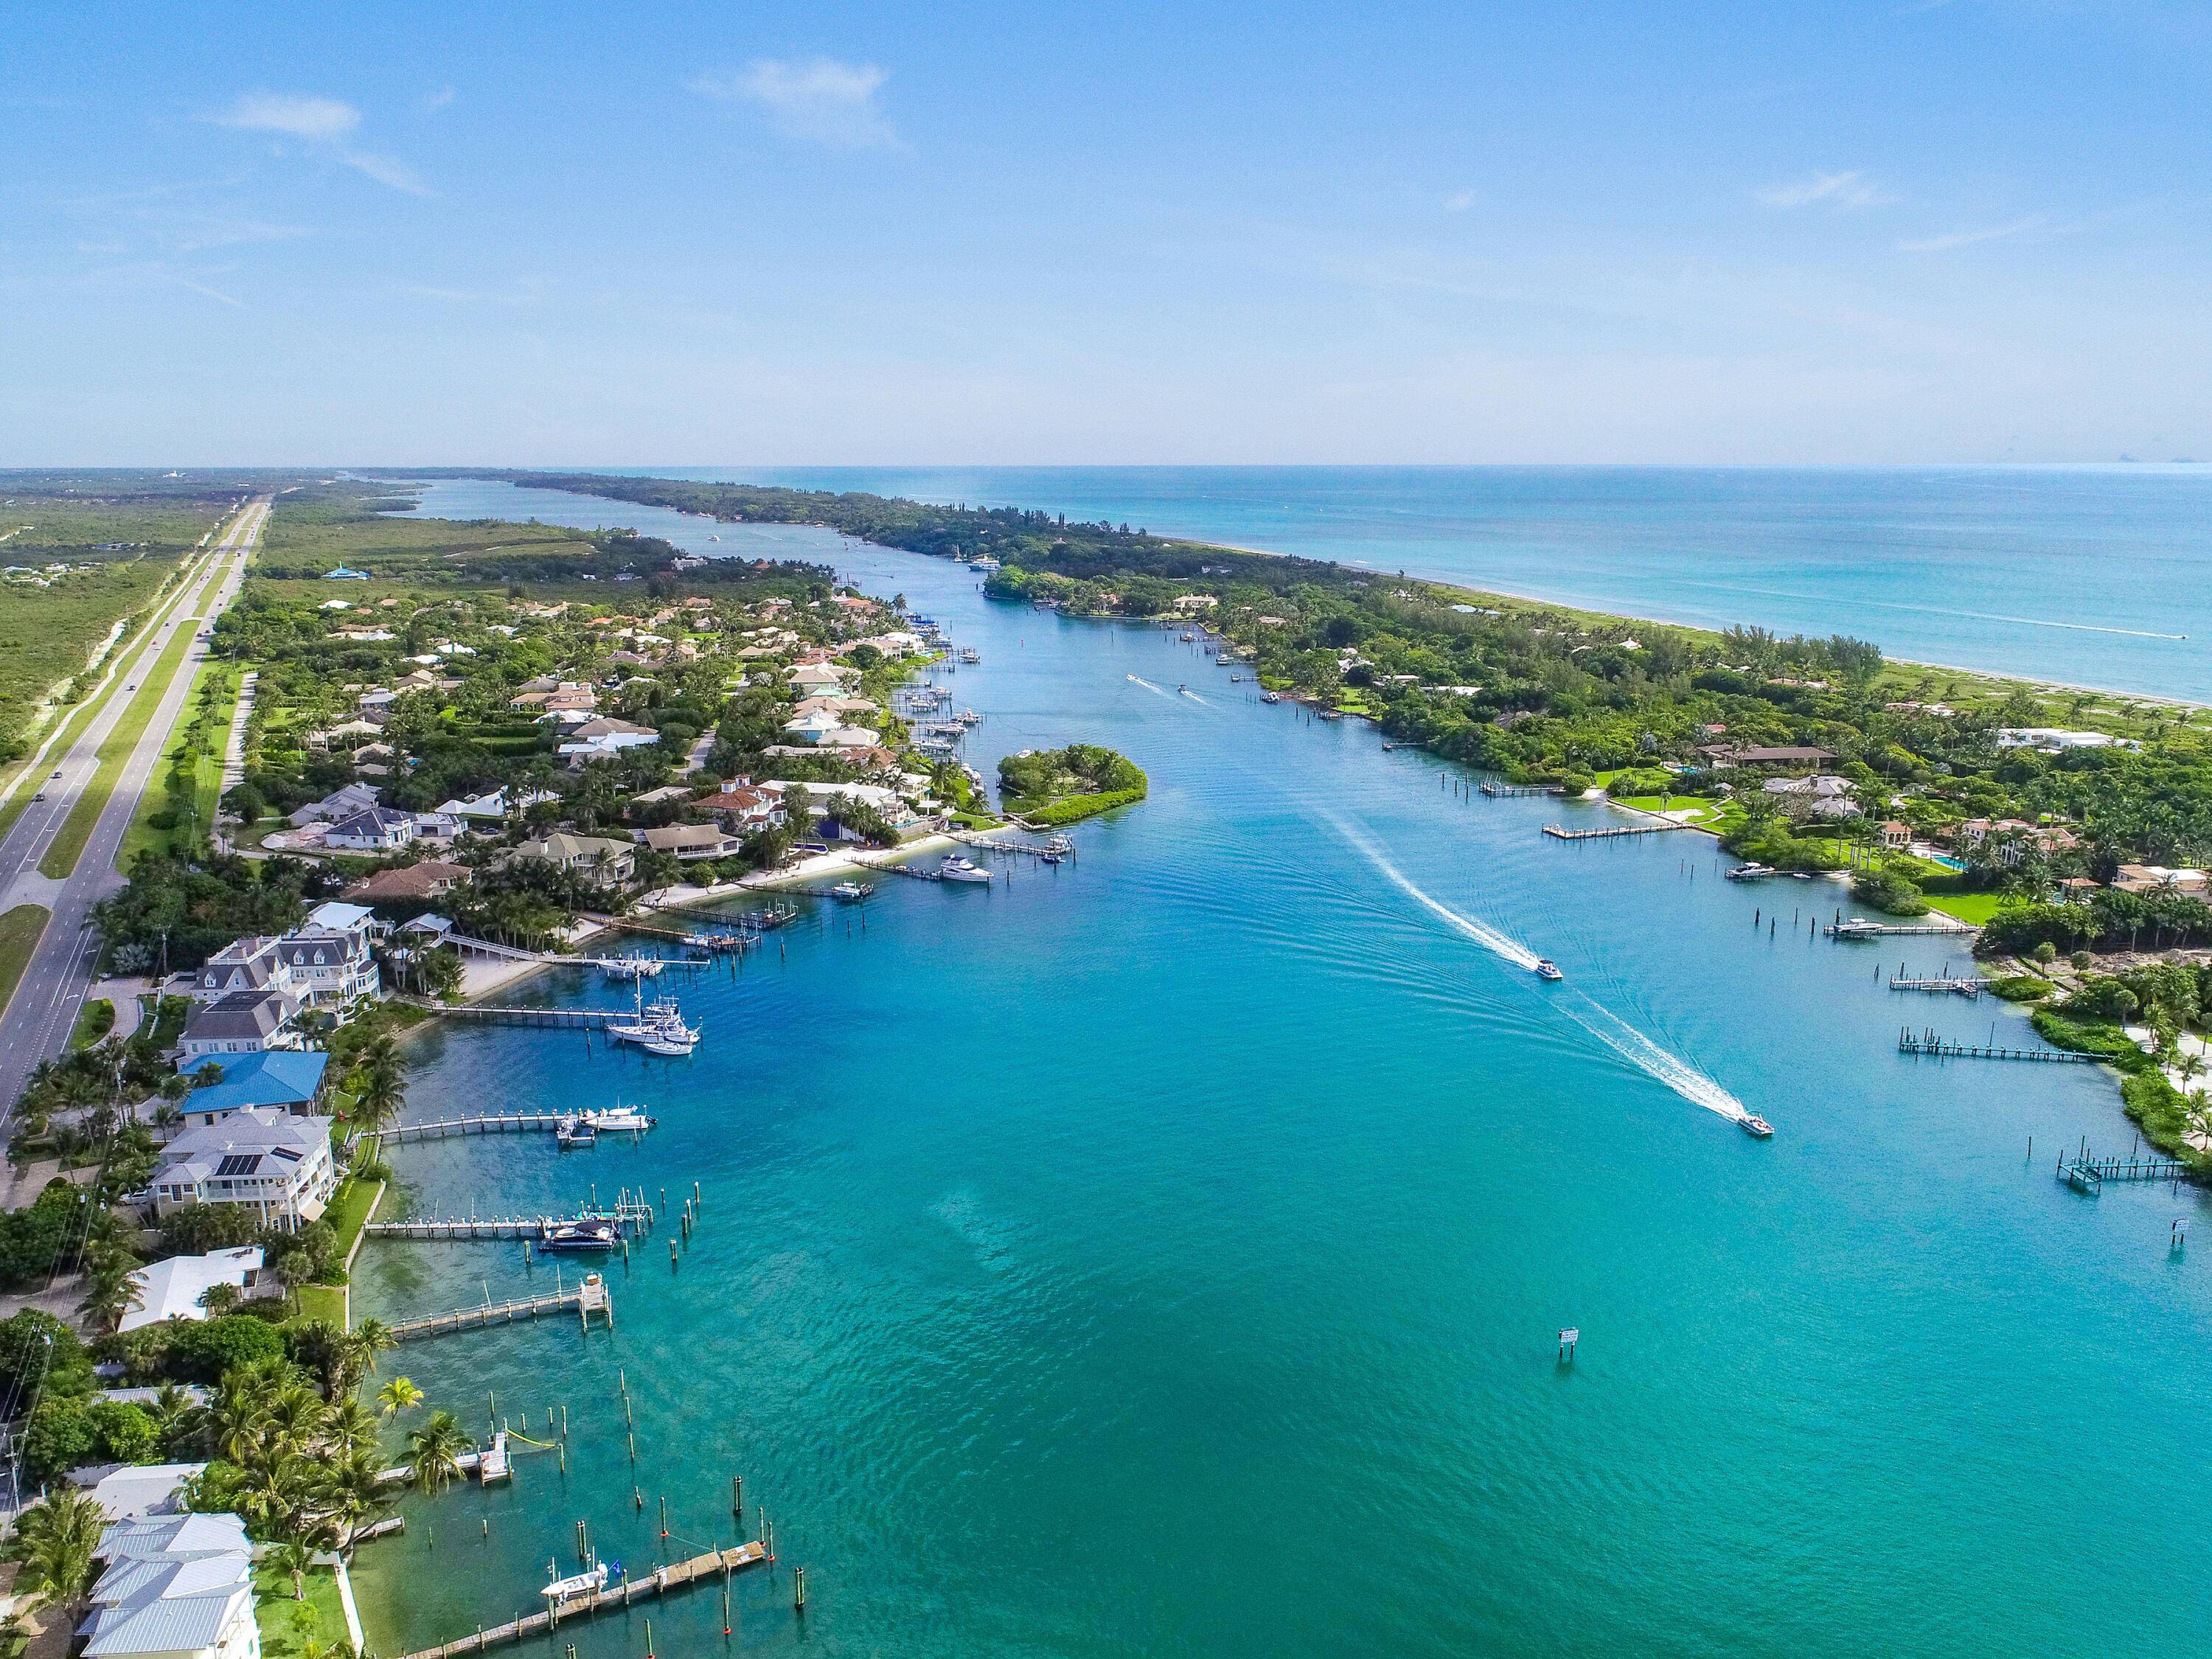 Rare opportunity to buy this Direct Intercoastal Multi Family property that offers the best beautiful turquoise waters as your backyard.